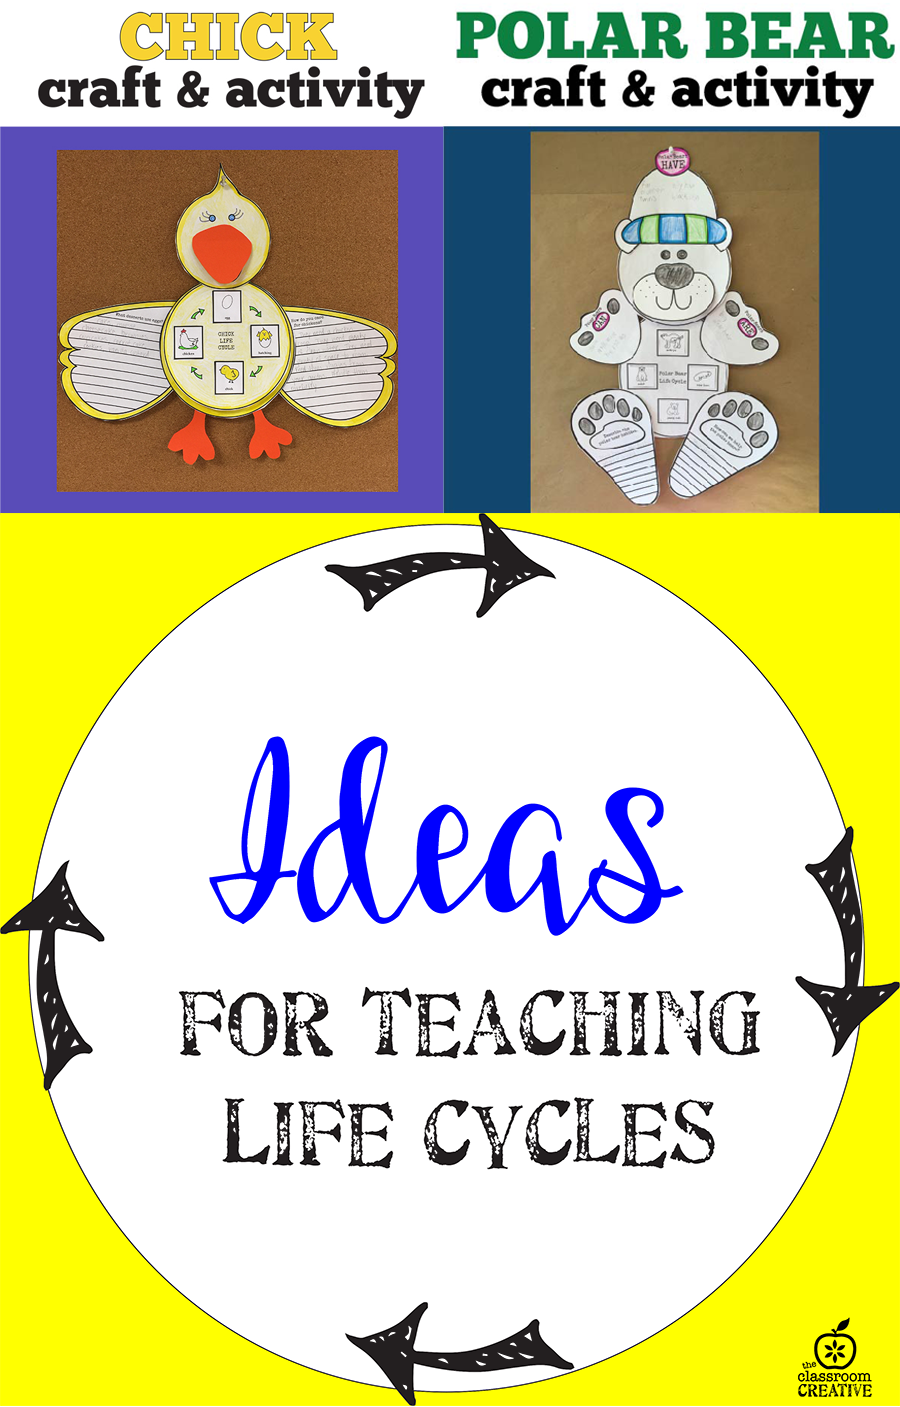 life cycle activities for fall, winter, spring, summer